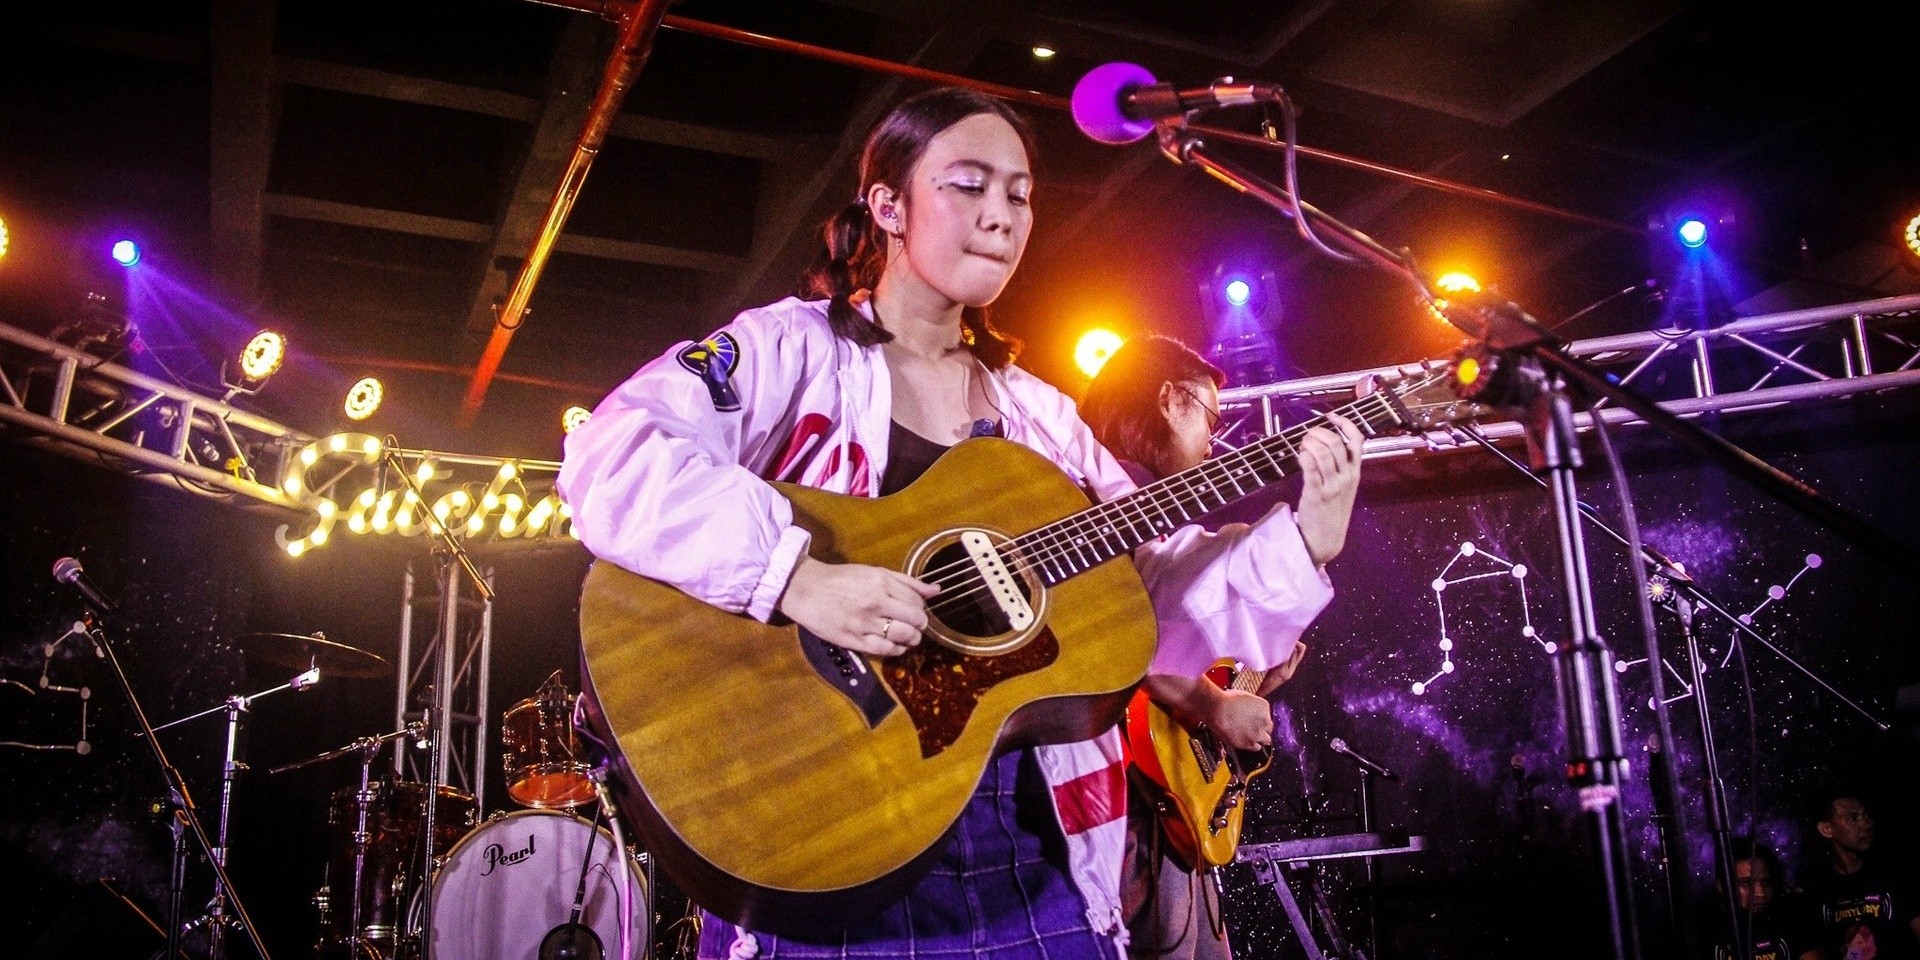 Filipina singer-songwriter Reese Lansangan's 'A Song About Space' is the soundtrack to NASA's new campaign #LaunchAmerica